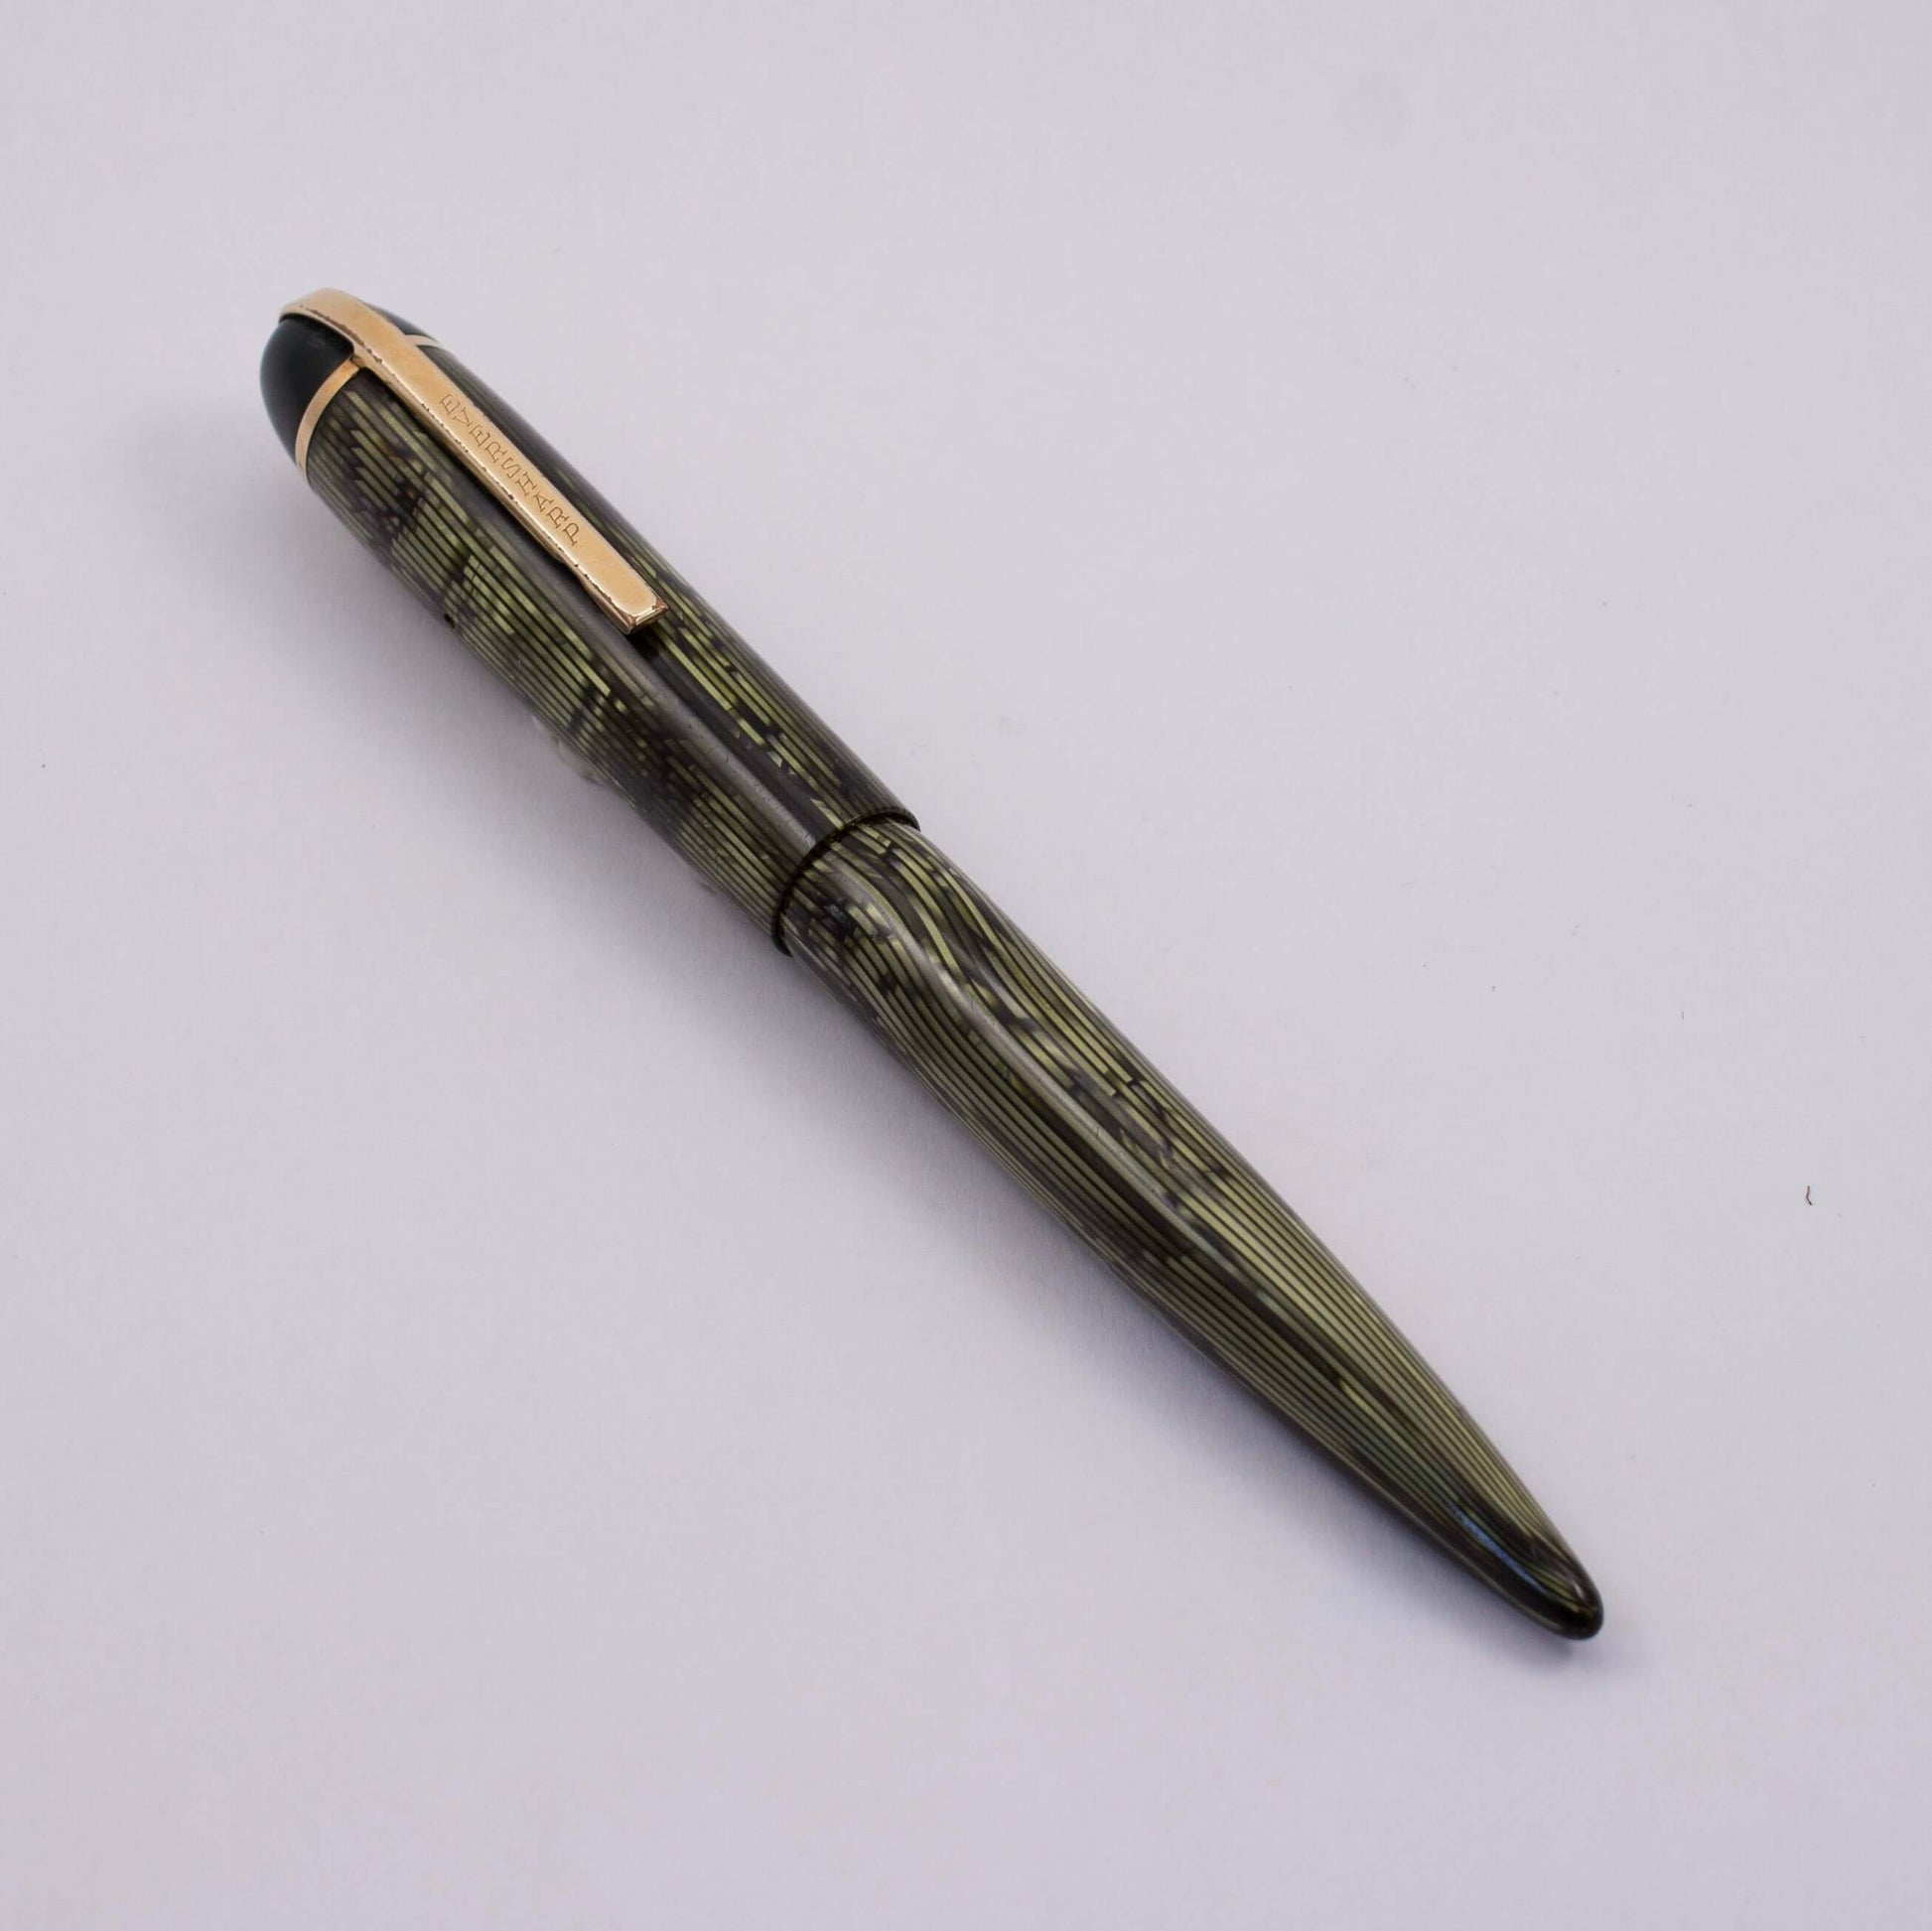 Eversharp Skyline Fountain Pen, Modern Strip Green Cap and Barrel, Gold Filled Trim, Fine 14k Nib Type: Restored Lever Filling Fountain Pen Product Name: Eversharp Skyline Manufacture Year: 1940's Length: ﻿5 1/4 Filling System: Lever Filler, restored with